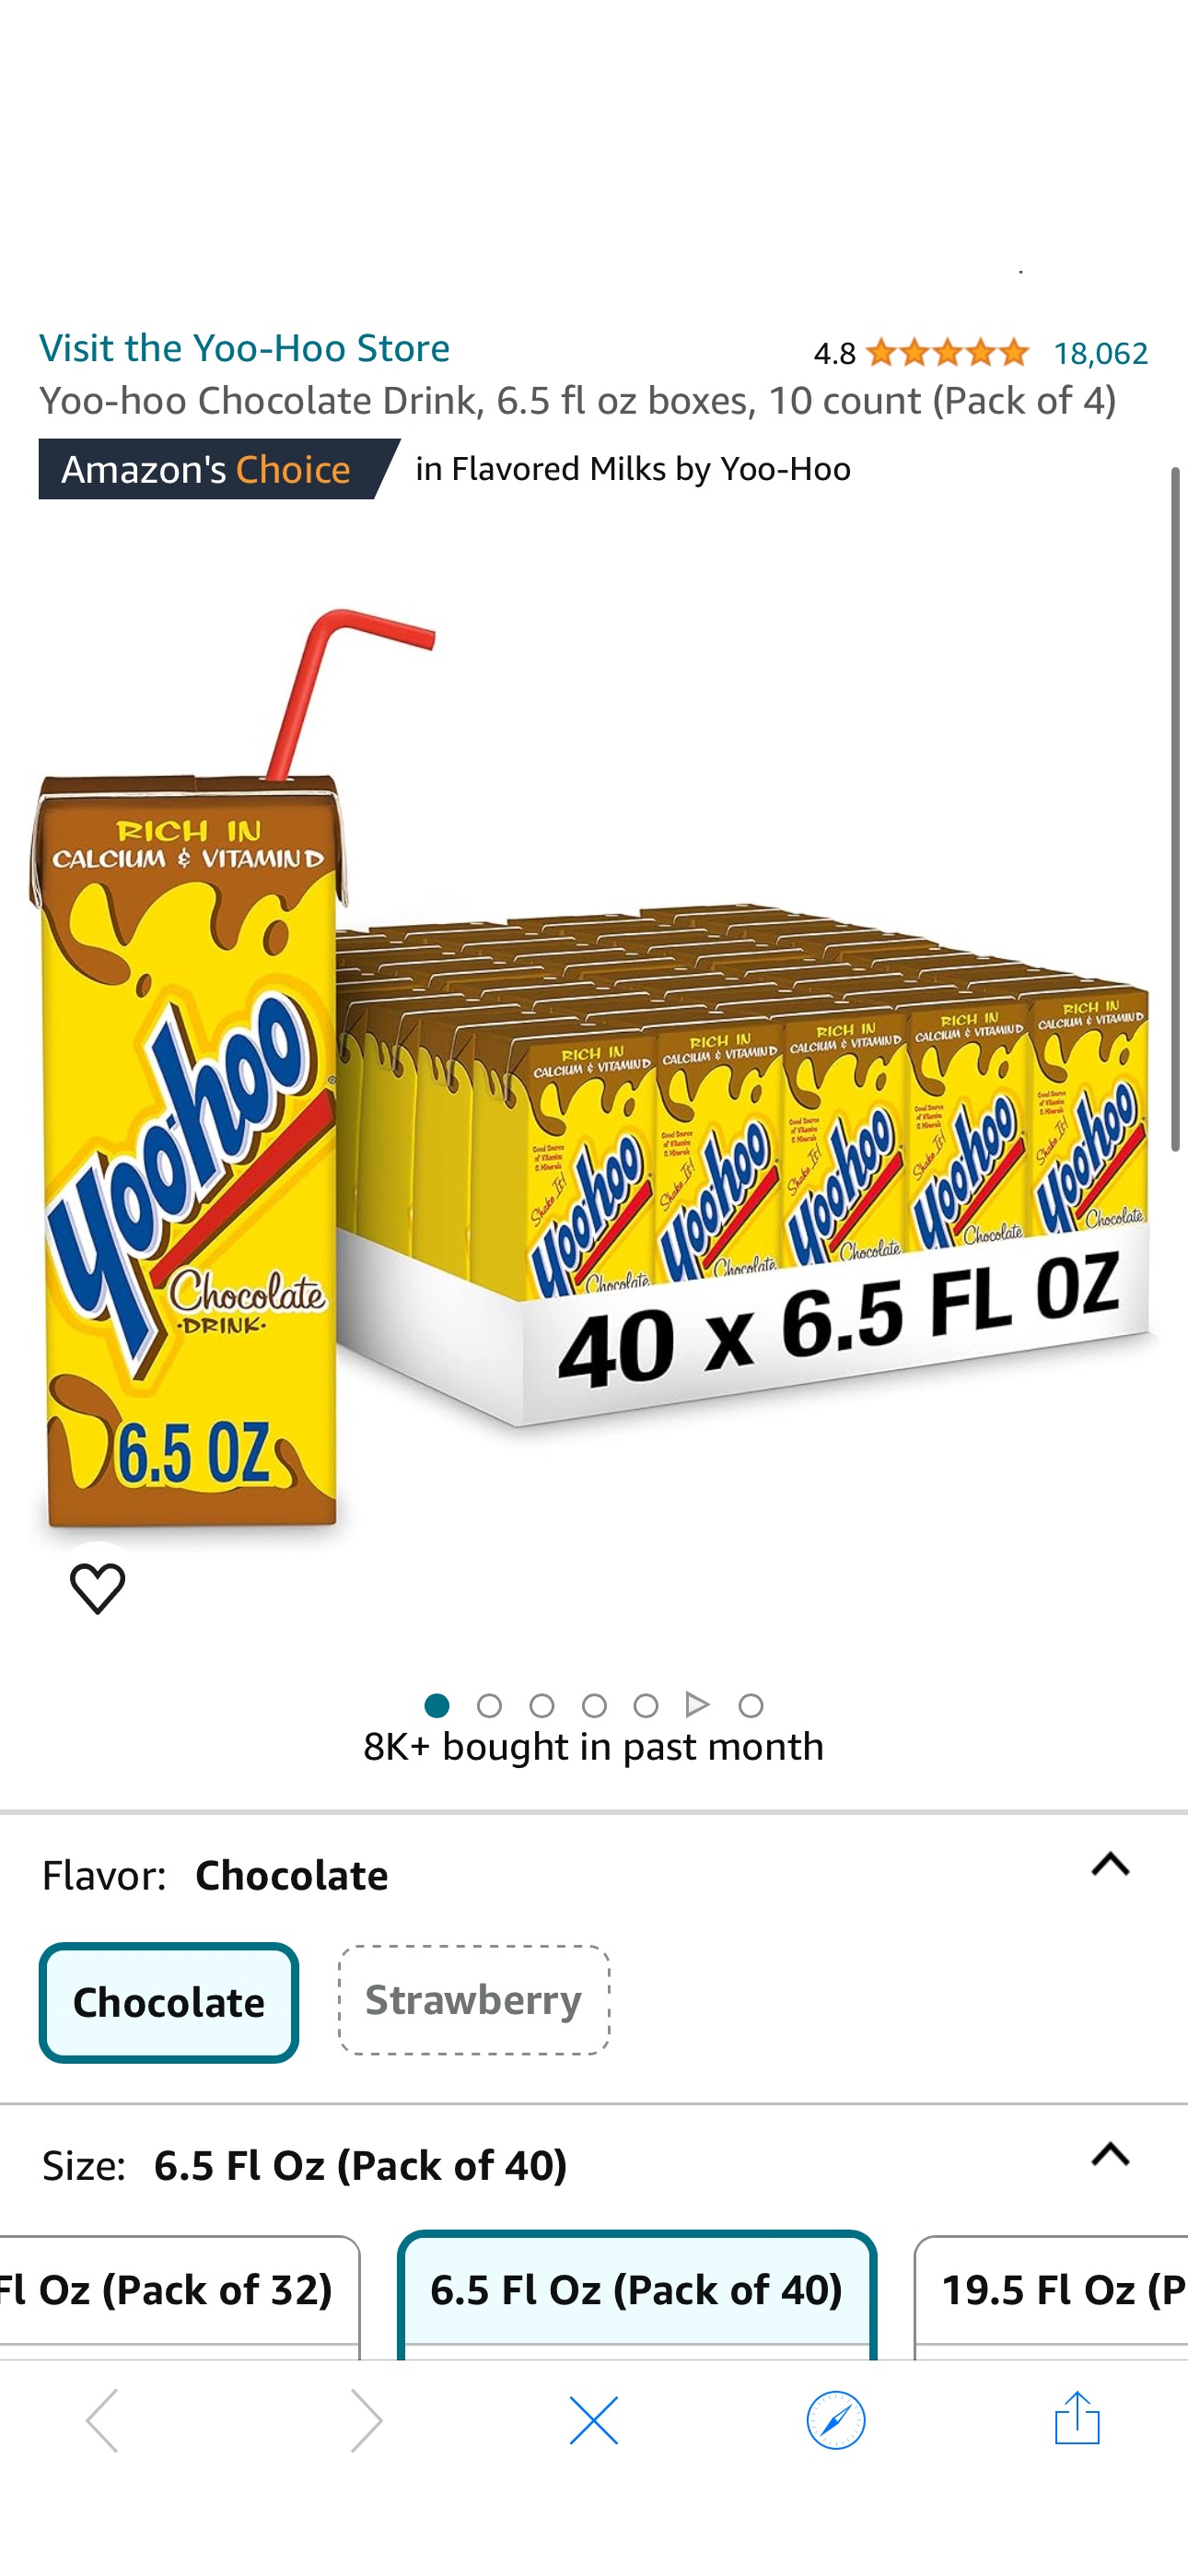 Amazon.com : Yoo-hoo Chocolate Drink, 6.5 fl oz boxes, 10 count (Pack of 4) : Beverages : Everything Else